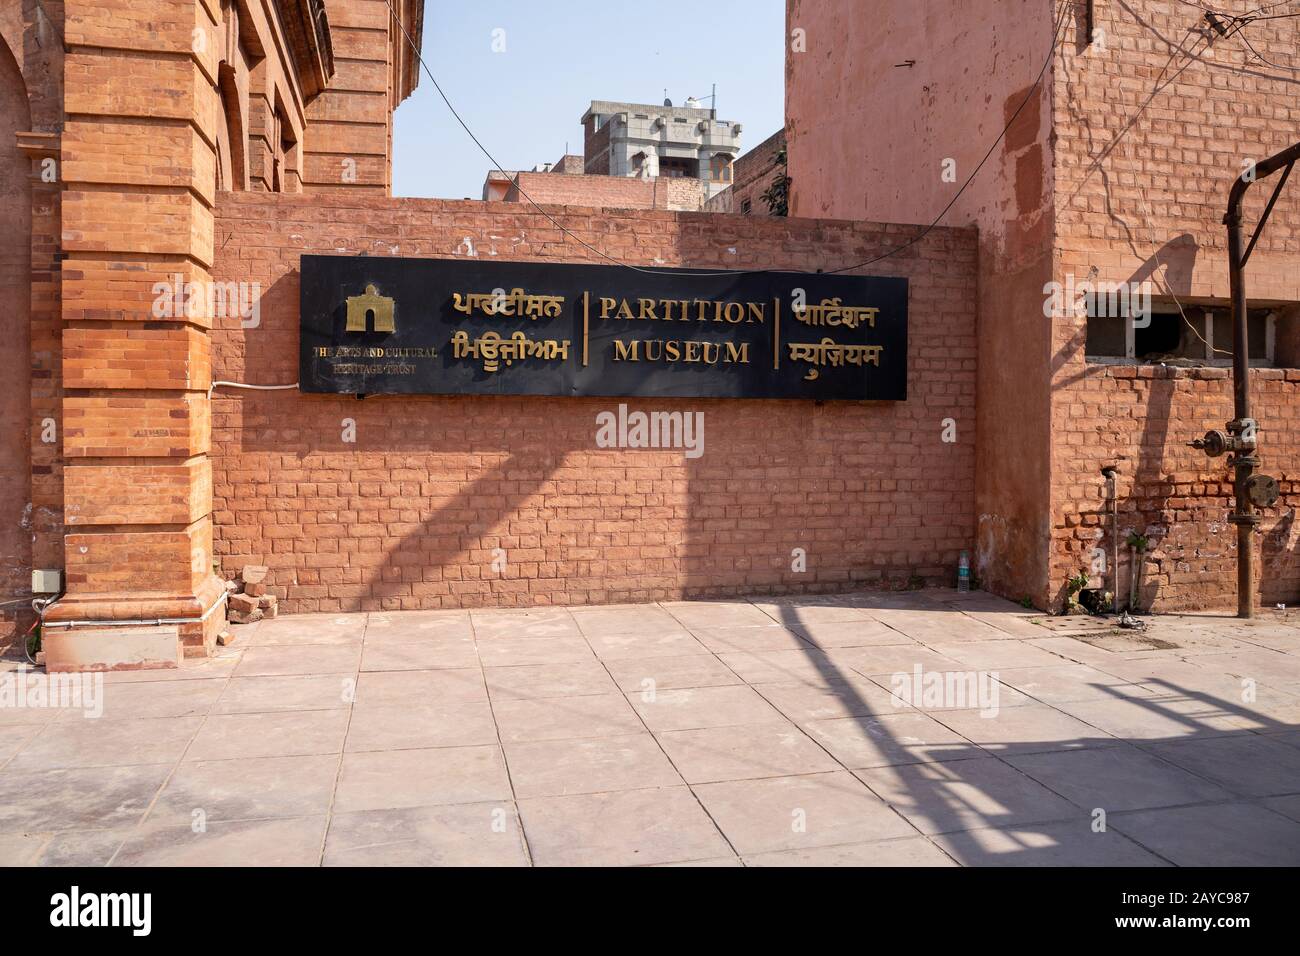 Amritsar, India - Febuary 8, 2020: Sign for the Partition Museum, which is an historic townhall building from the British rule era converted into a Mu Stock Photo